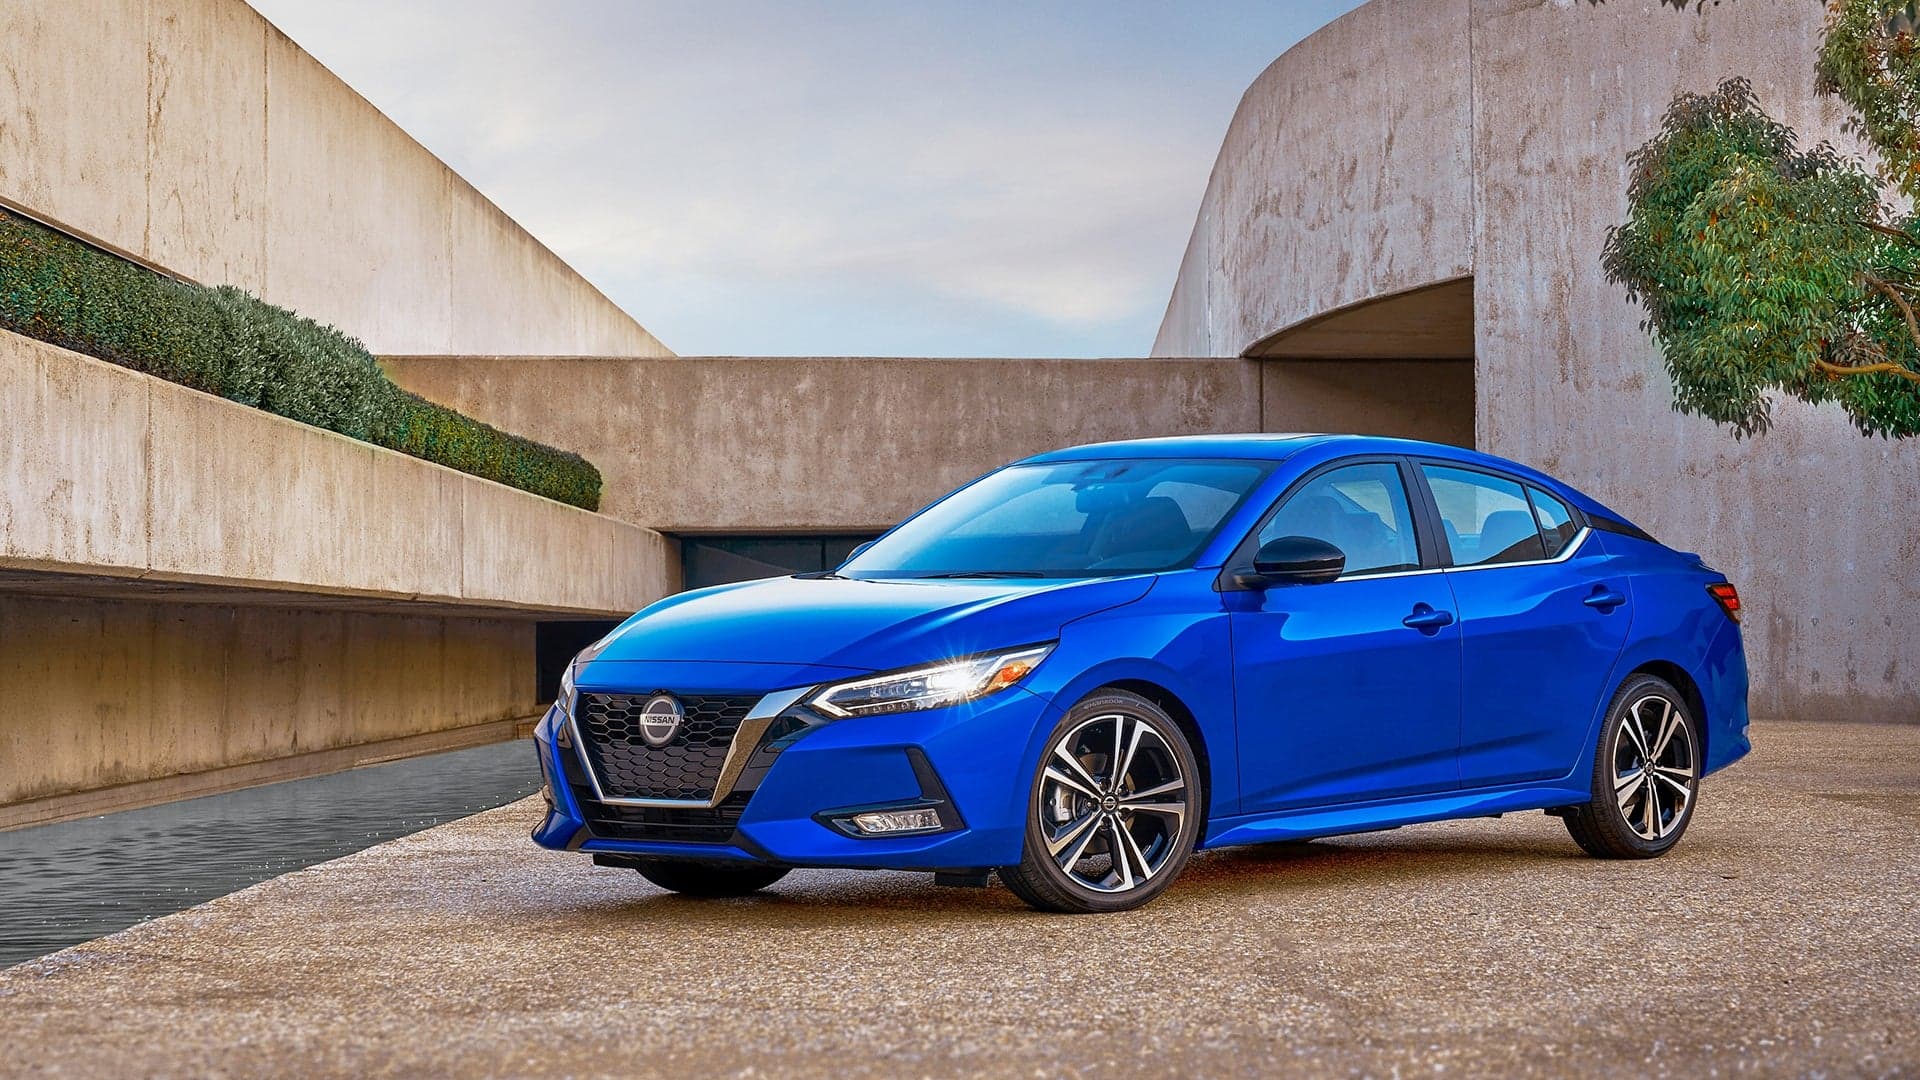 2020 Nissan Sentra Moves Upmarket With New Styling, Platform, and Safety Tech